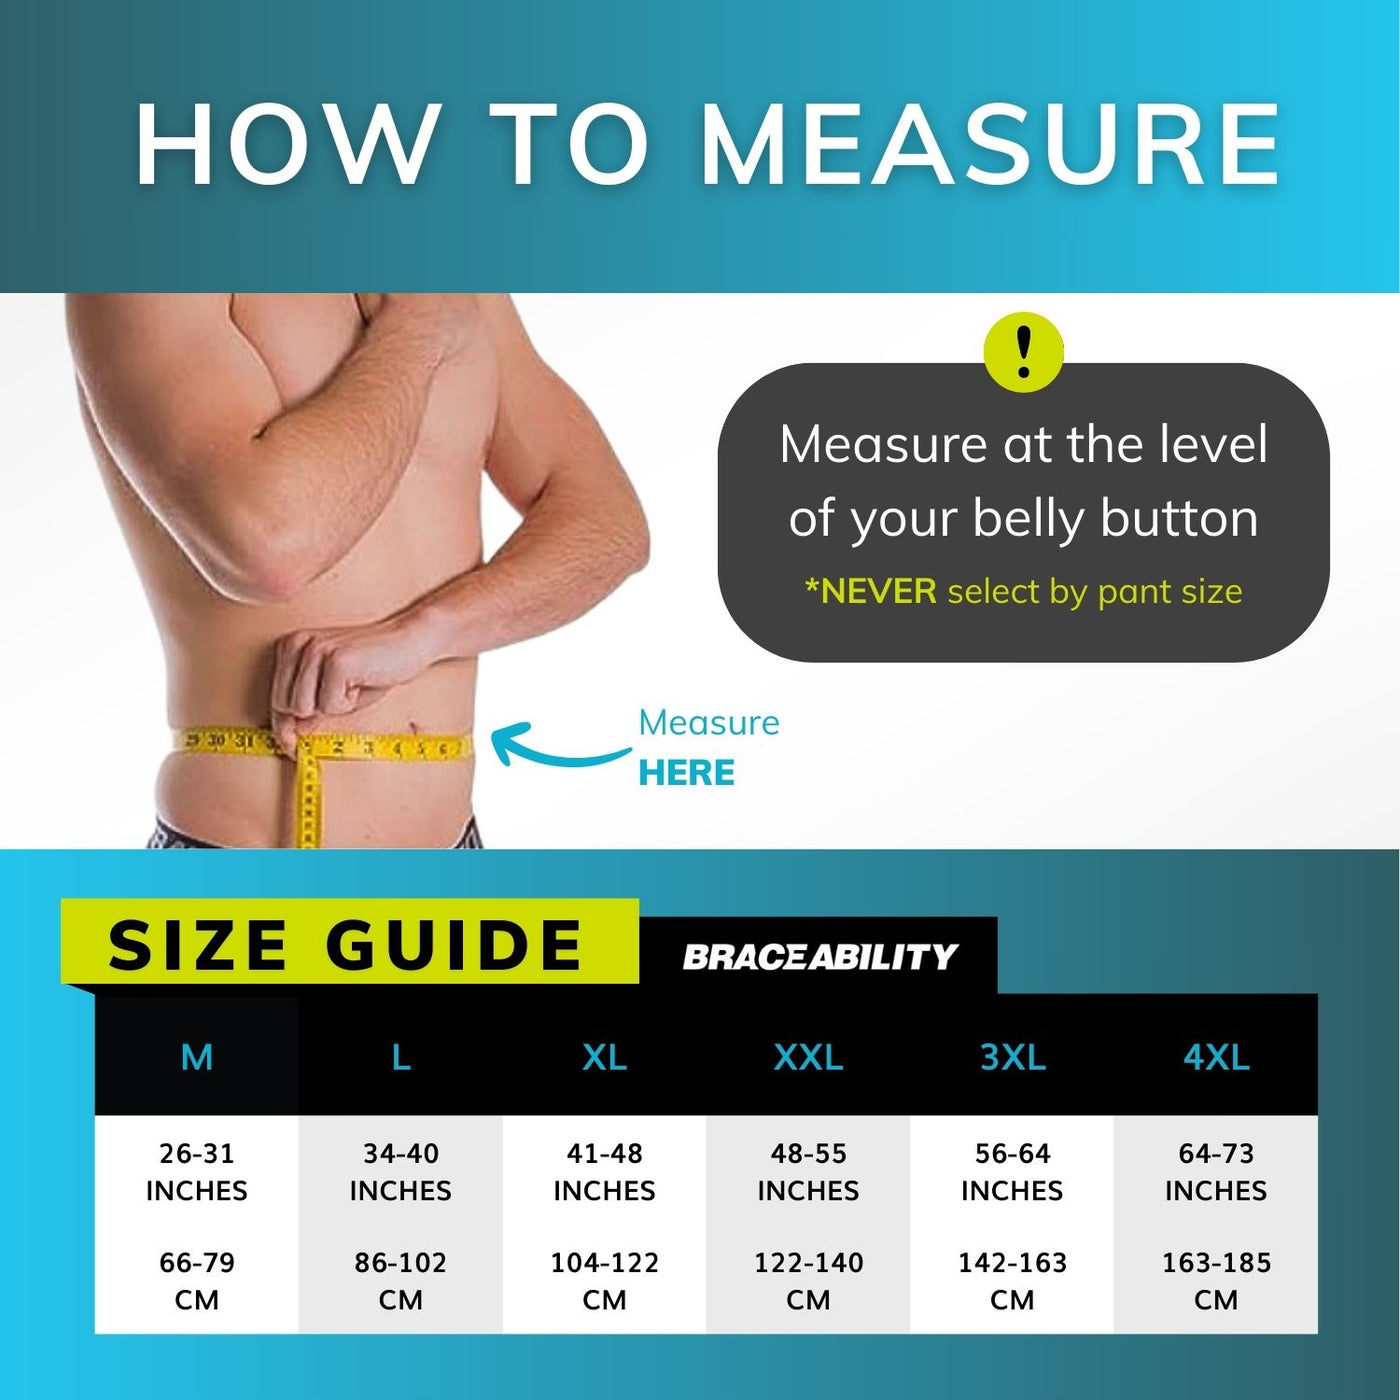 Sizing chart for the industrial back belt - measure the circumference around your stomach at your belly button. M-4XL fits circumferences 26 inches to 73 inches